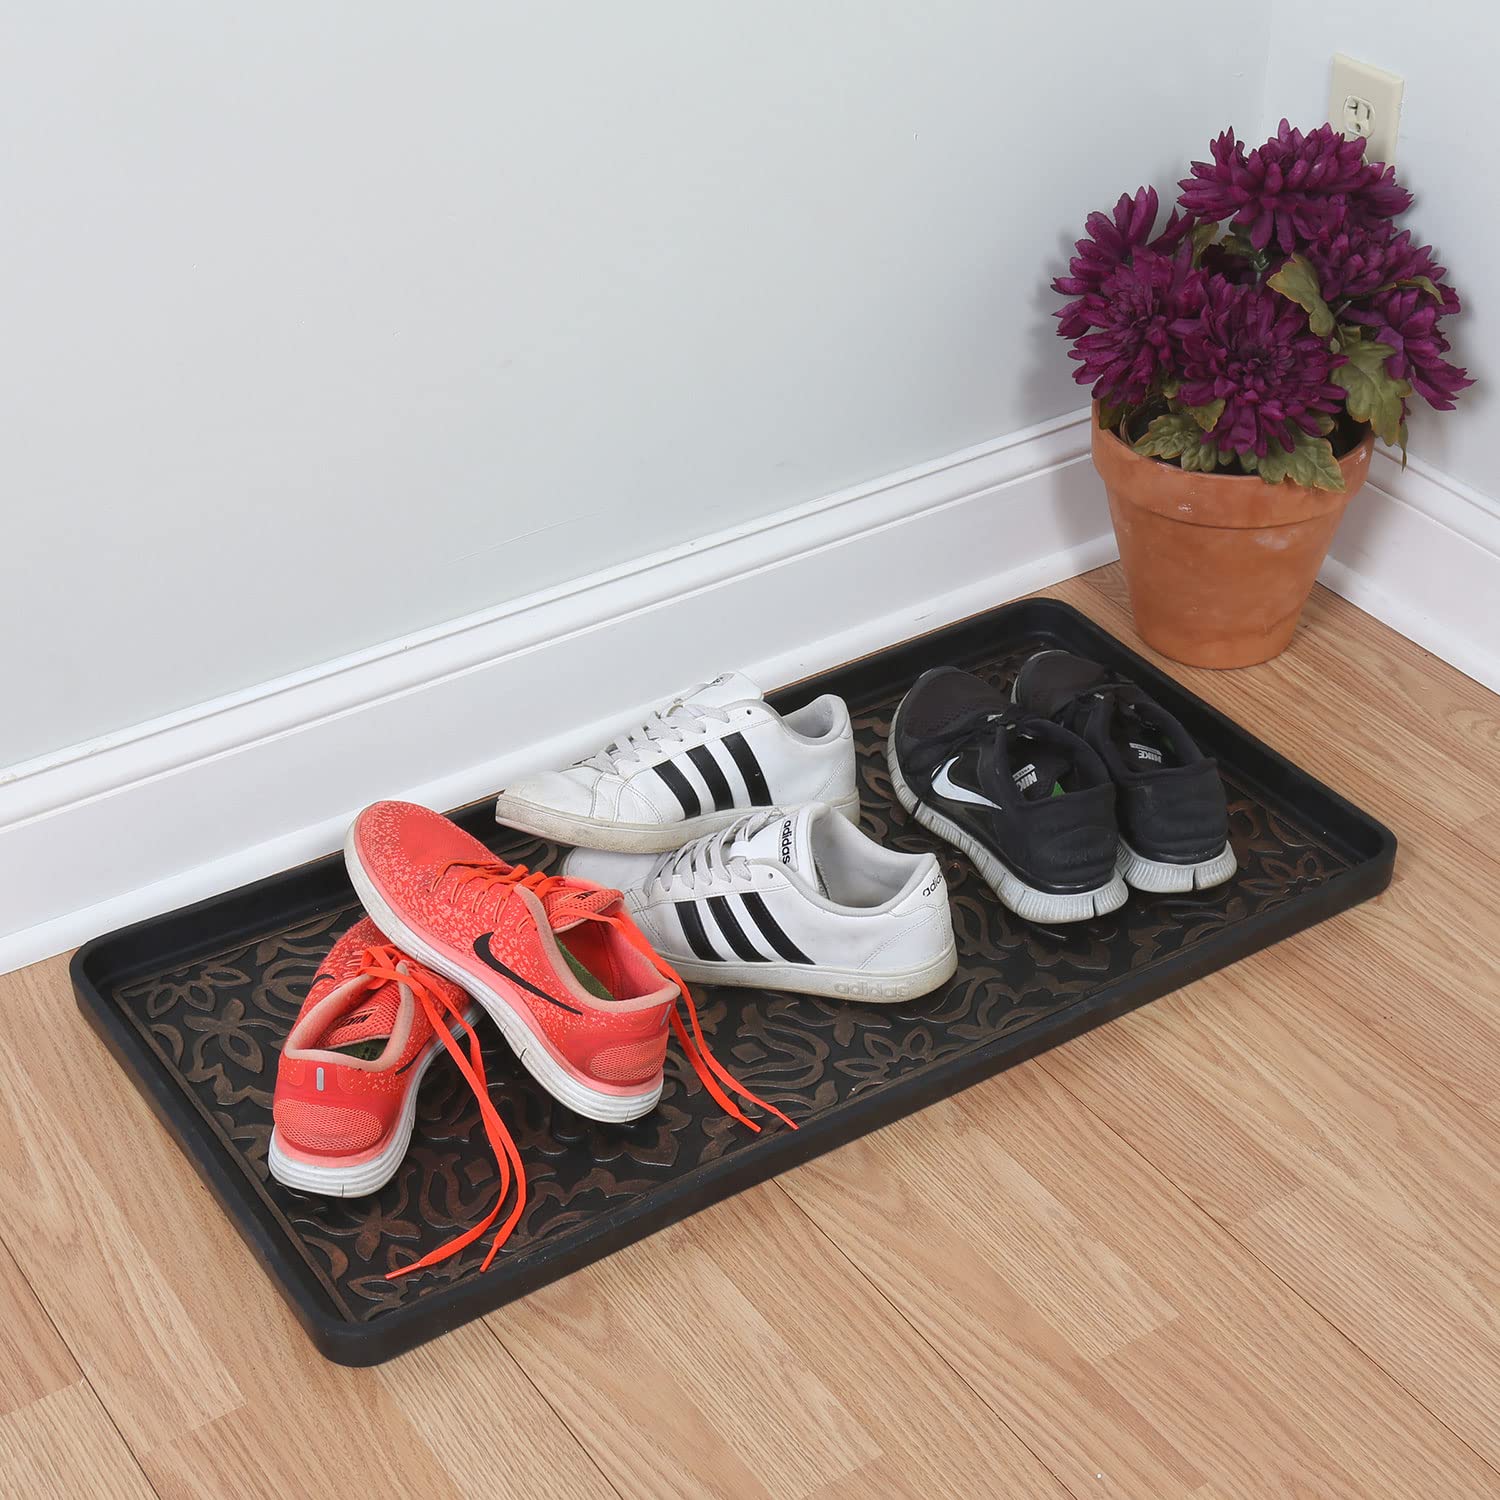 ART & ARTIFACT Rubber Boot Tray Wet Shoe Tray for Entryway Indoor Outdoor Rubber Mat Extra Large Boot Tray 32" x 16", Black, Damask